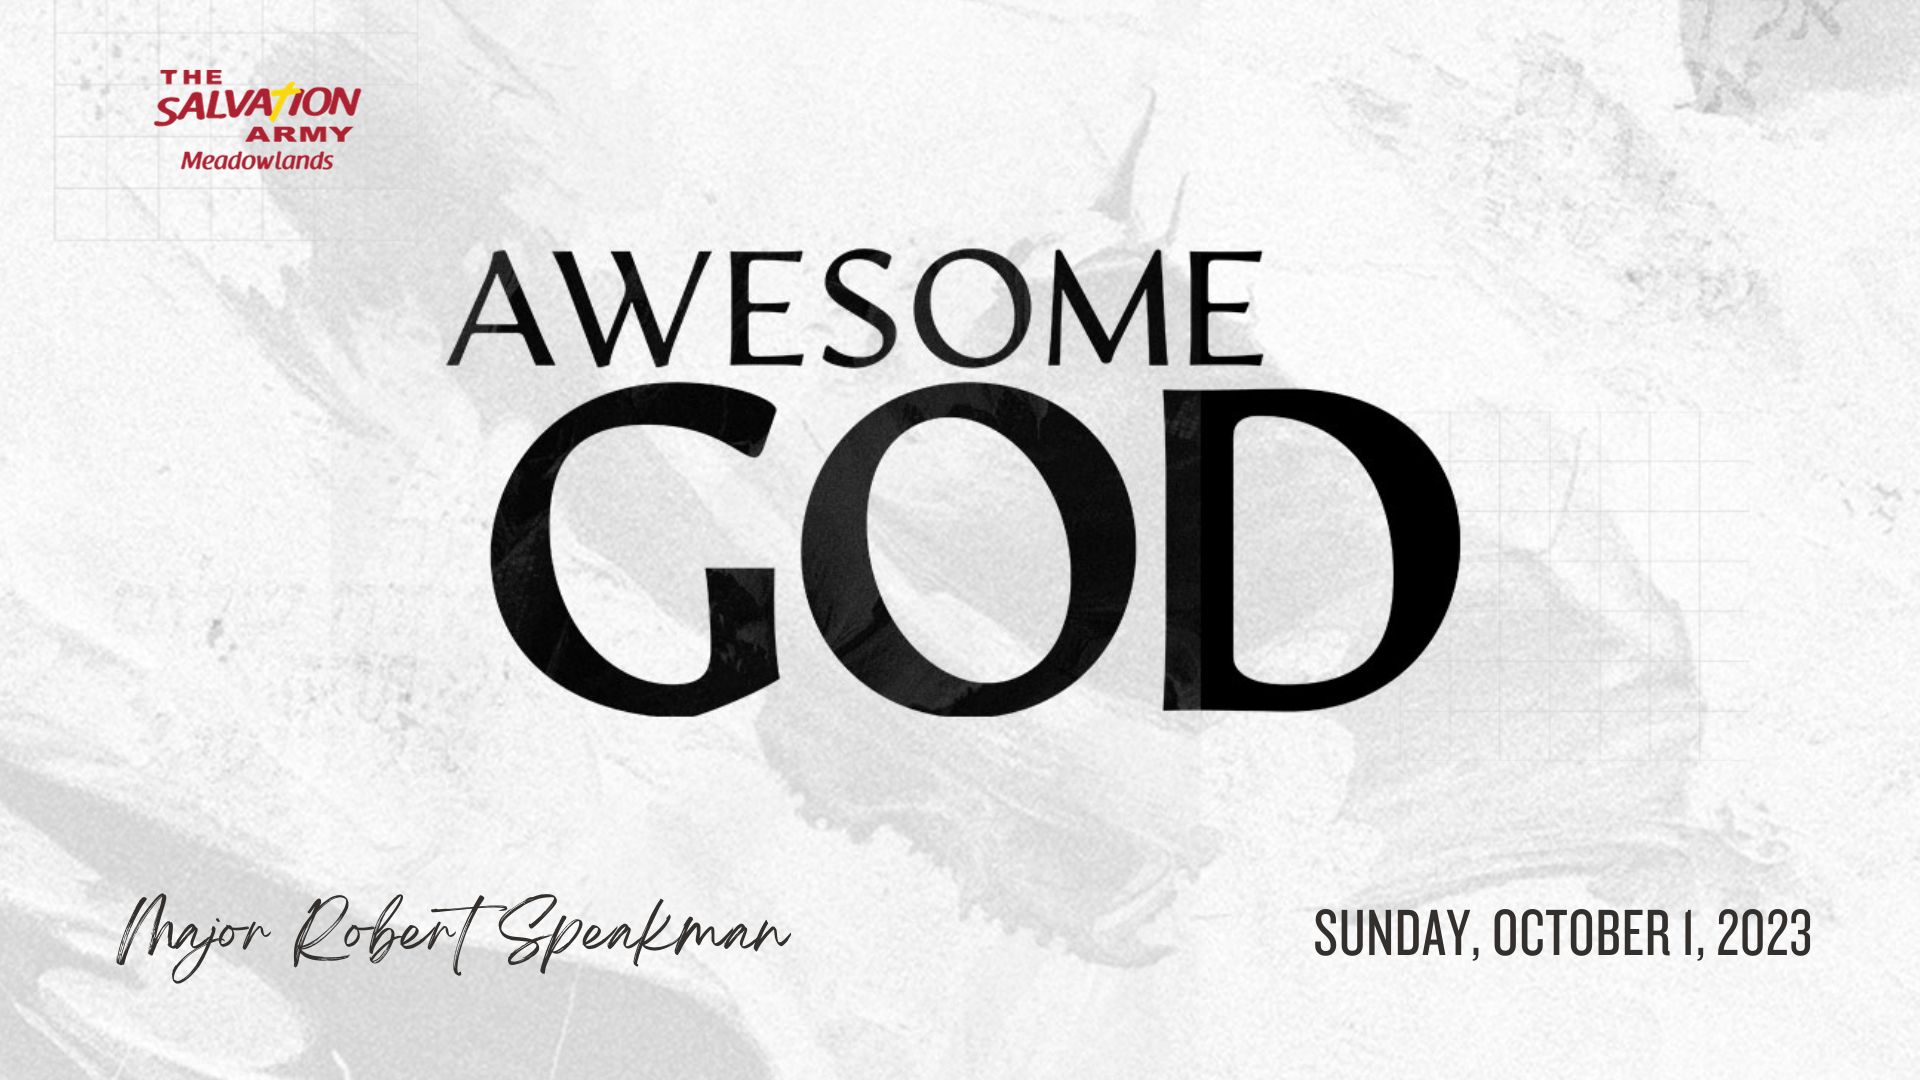 Awesome God | Major Robert Speakman will be our guest this Sunday